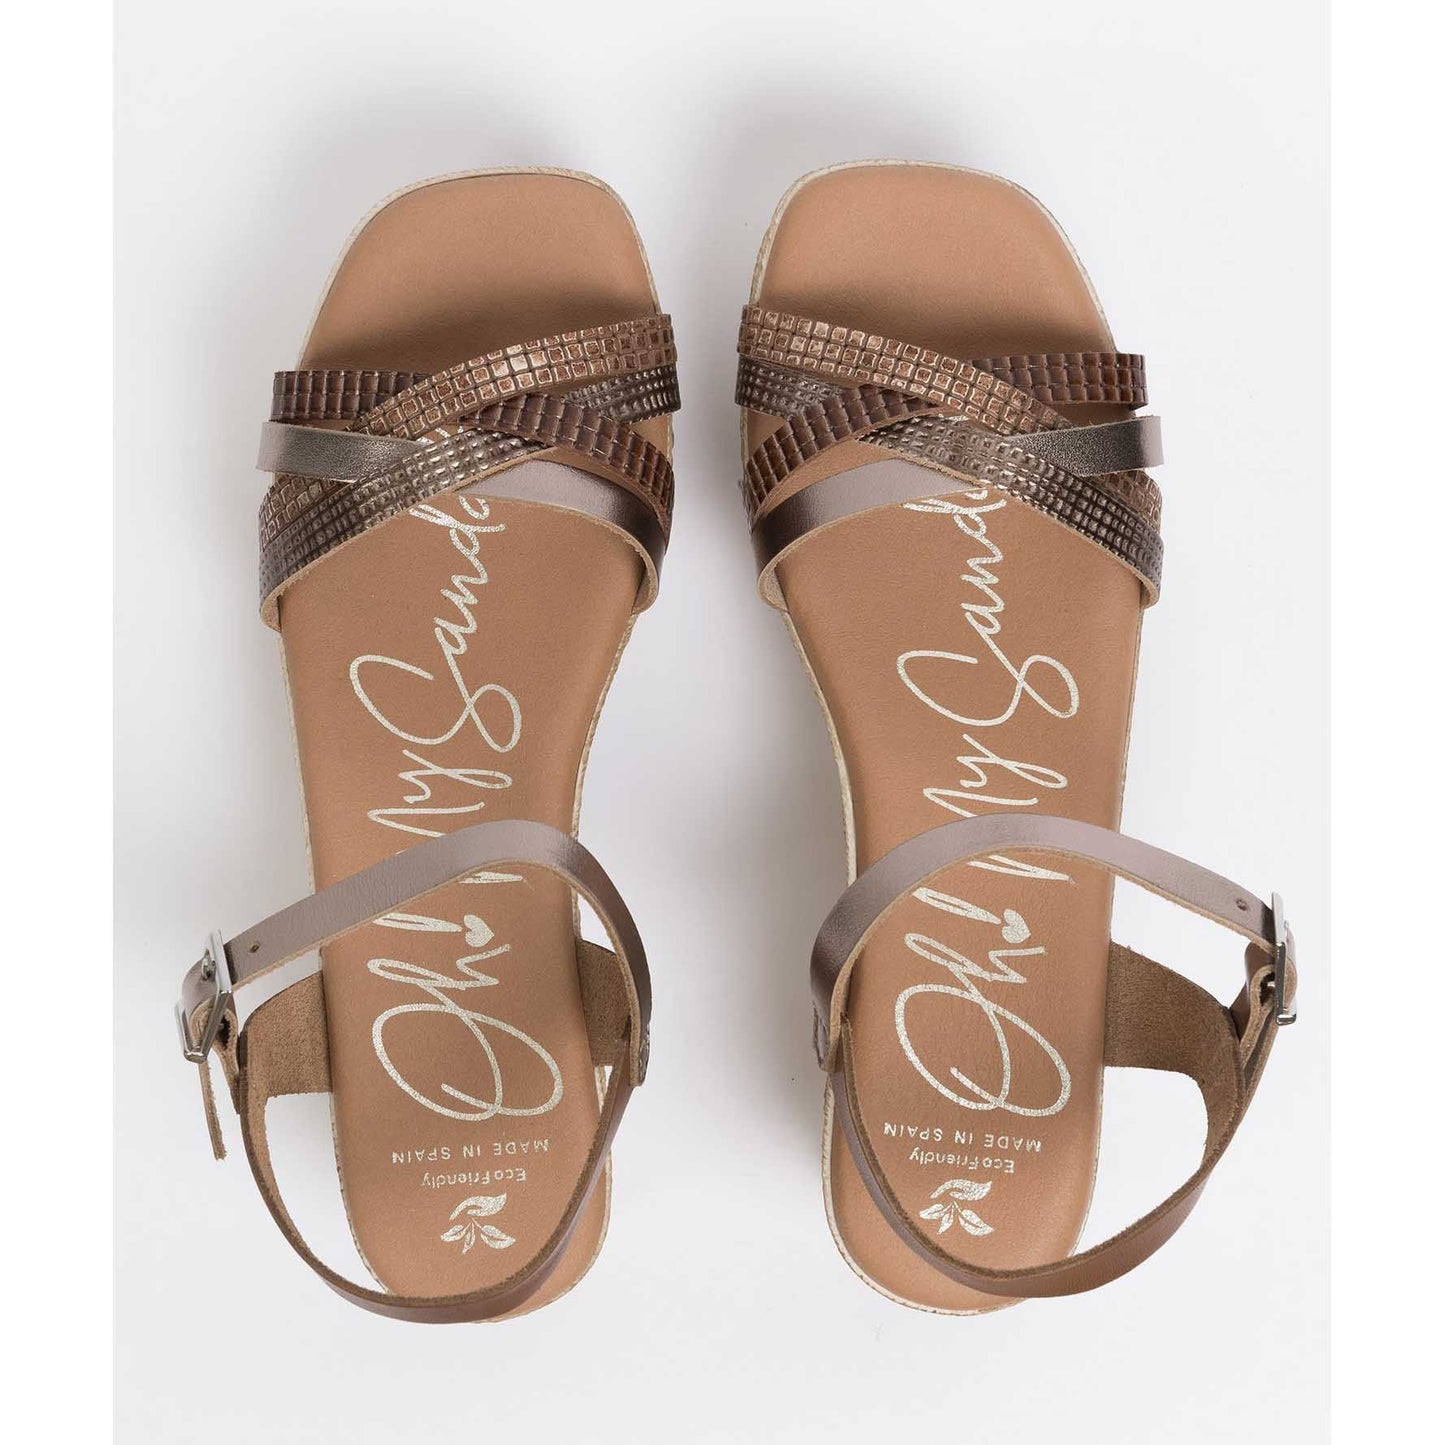 Oh My Sandals Sandali Camel in pelle Made in Spagna